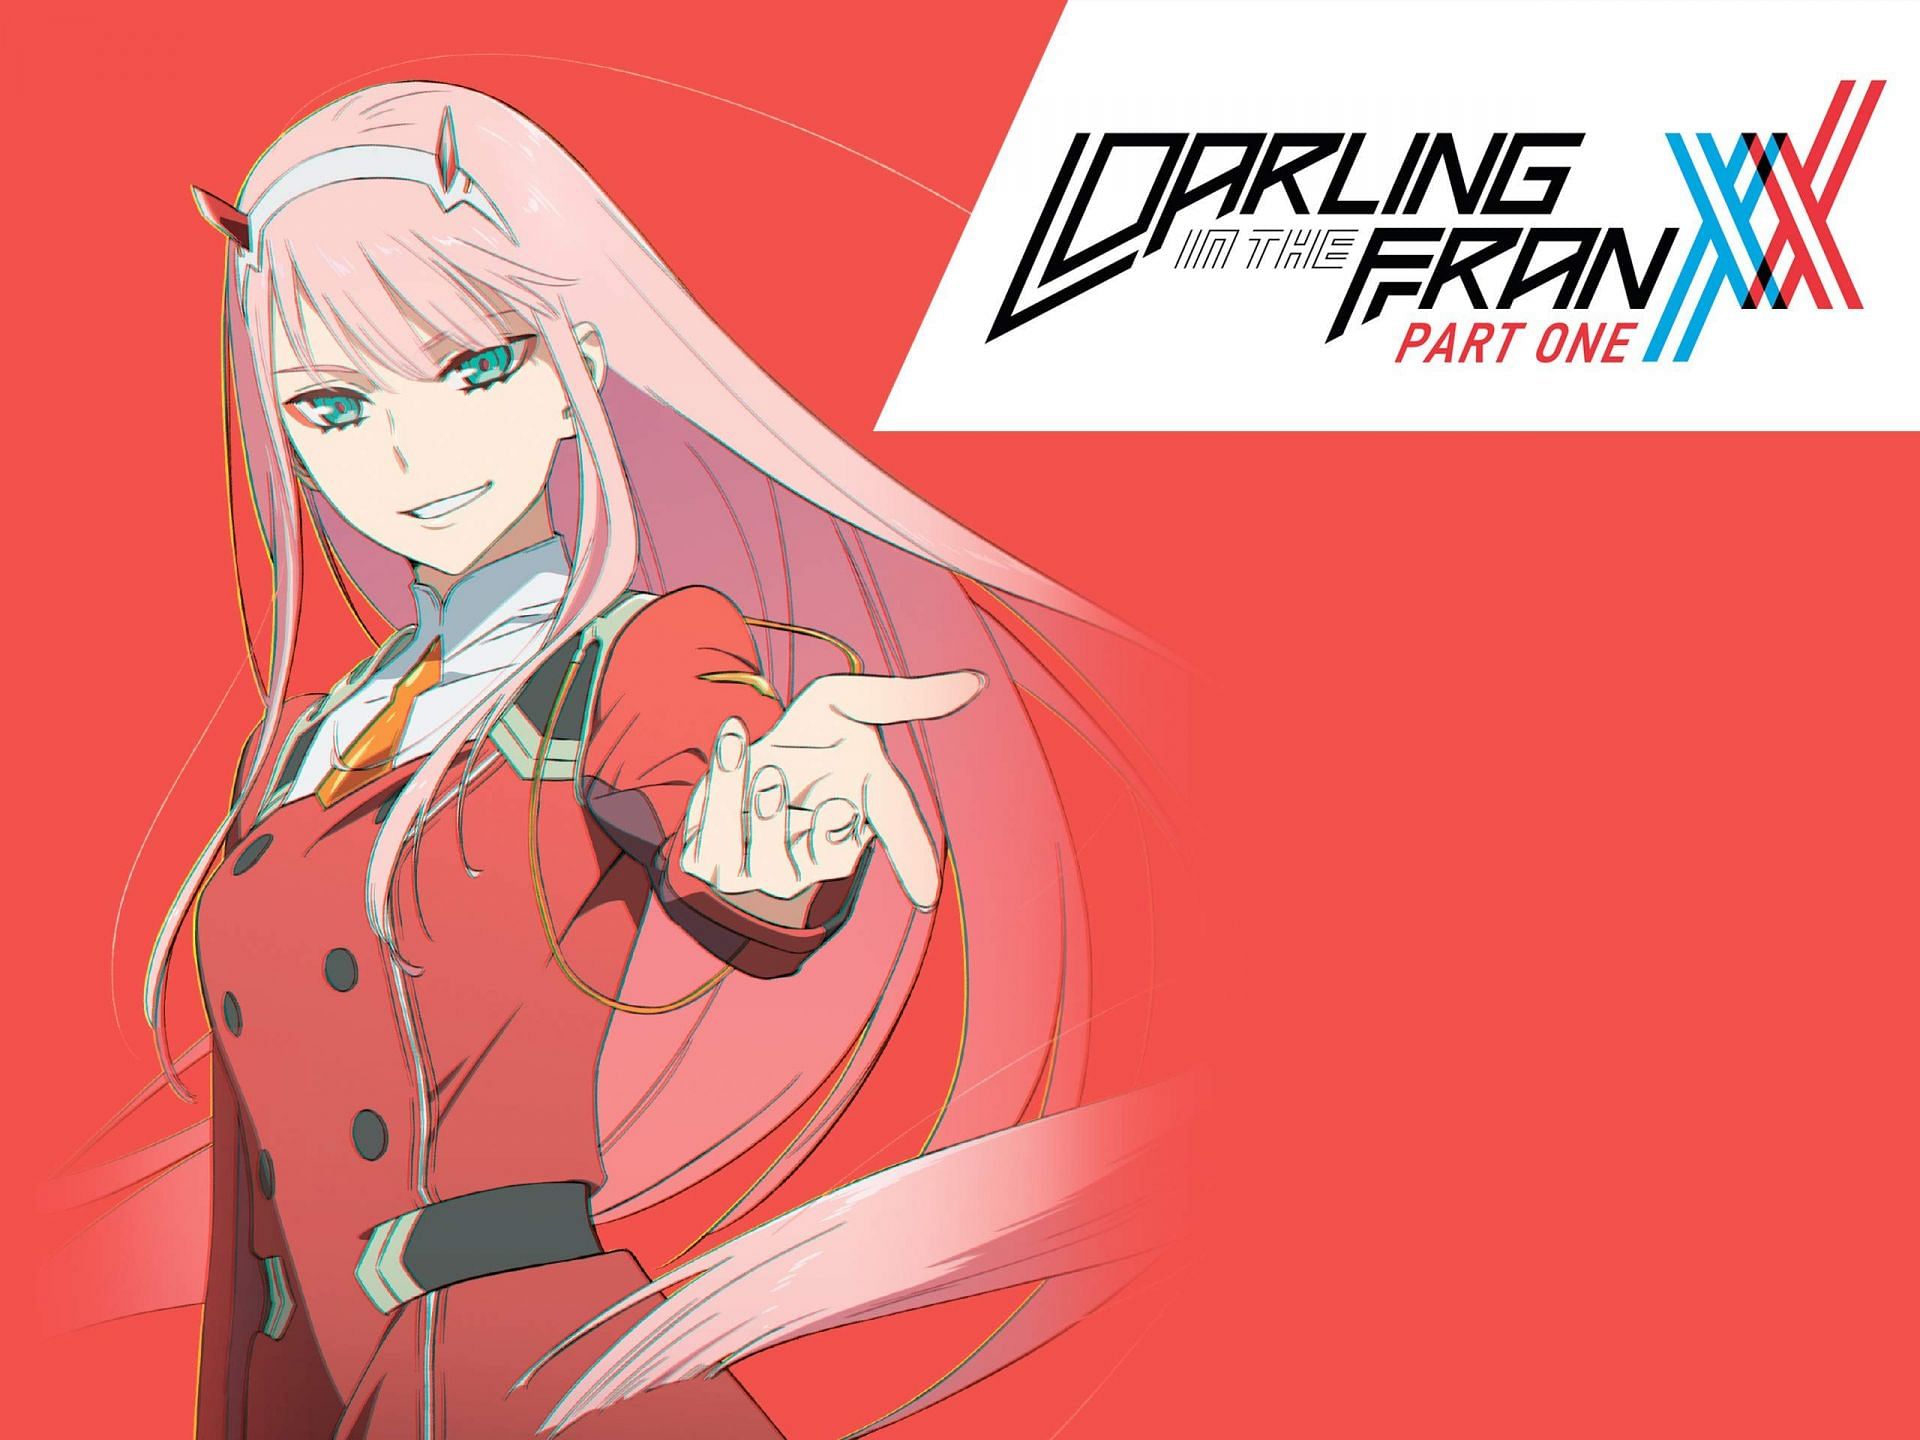 Darling in the Franxx (Image via A-1 Pictures/Studio Trigger/Cloverworks)